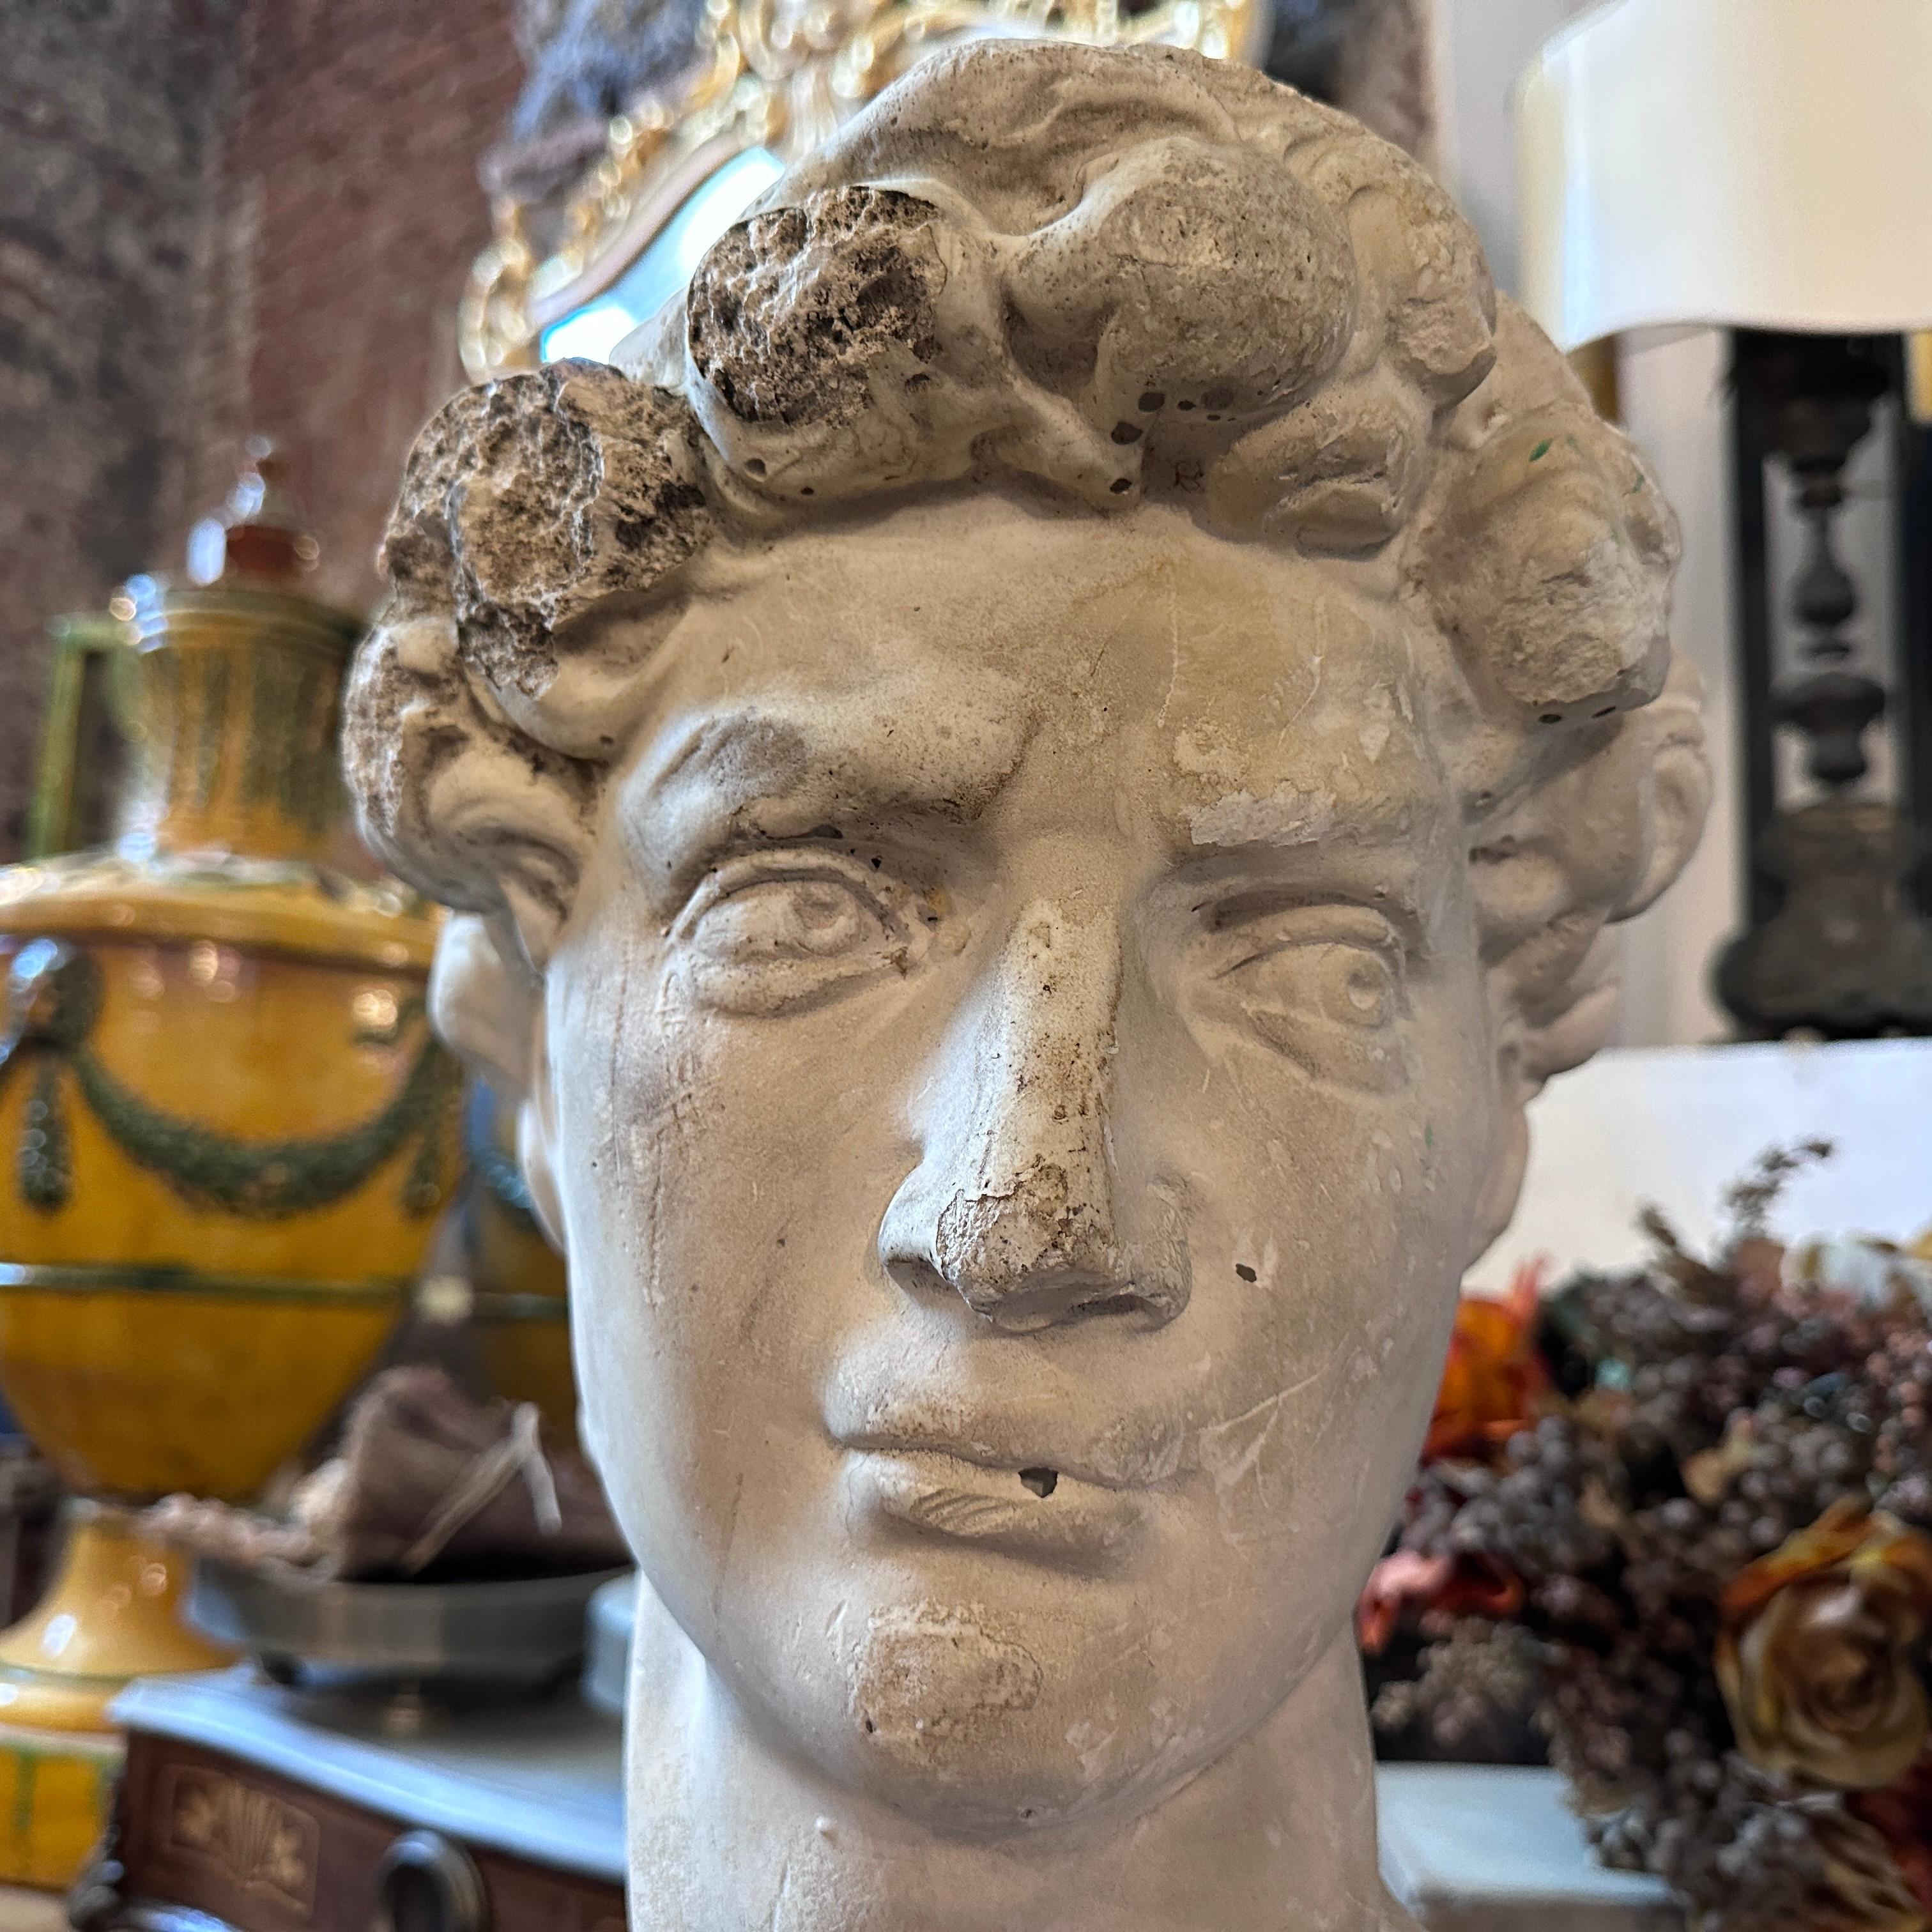 Italian Early 20th Century Plaster Sculpture of the Bust of David by Michelangelo